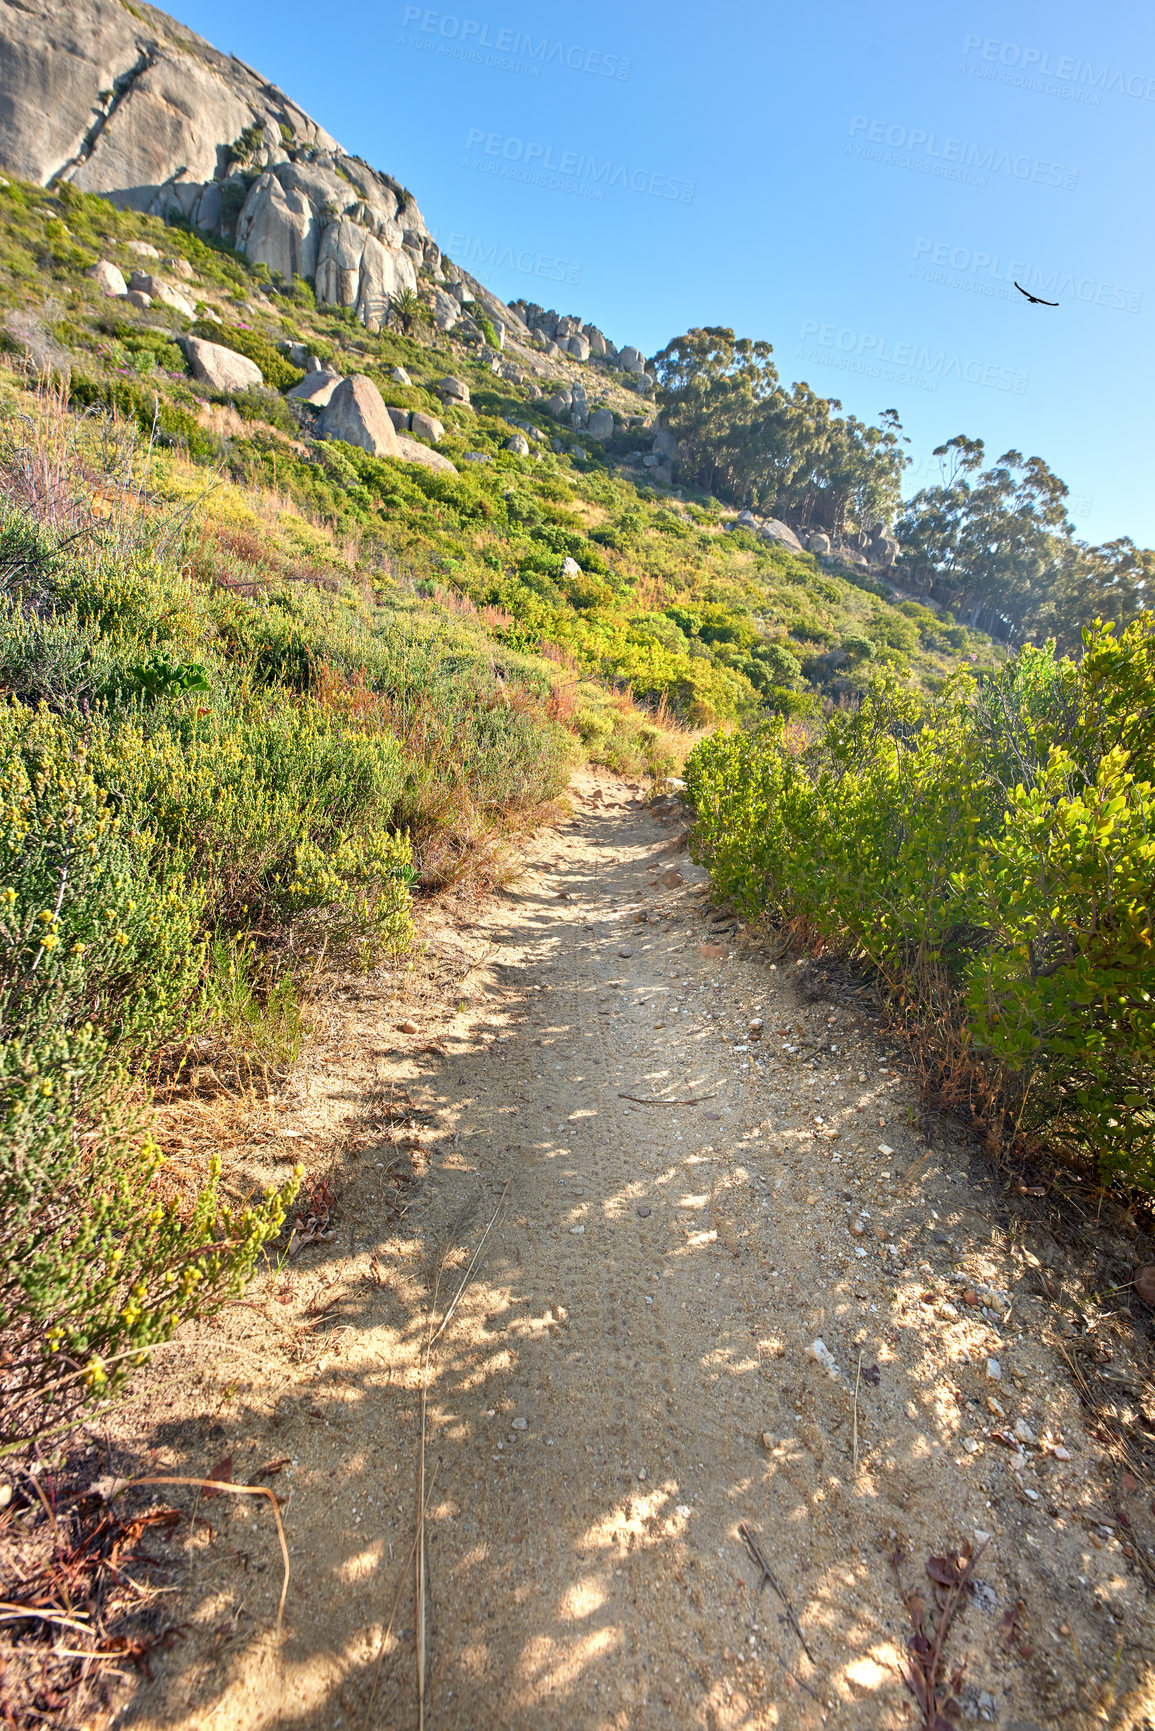 Buy stock photo Hiking trail on Table Mountain National Park in Cape Town South Africa on a sunny day with blue sky. Scenic landscape with walking paths to explore in nature surrounded by green bushes and trees
